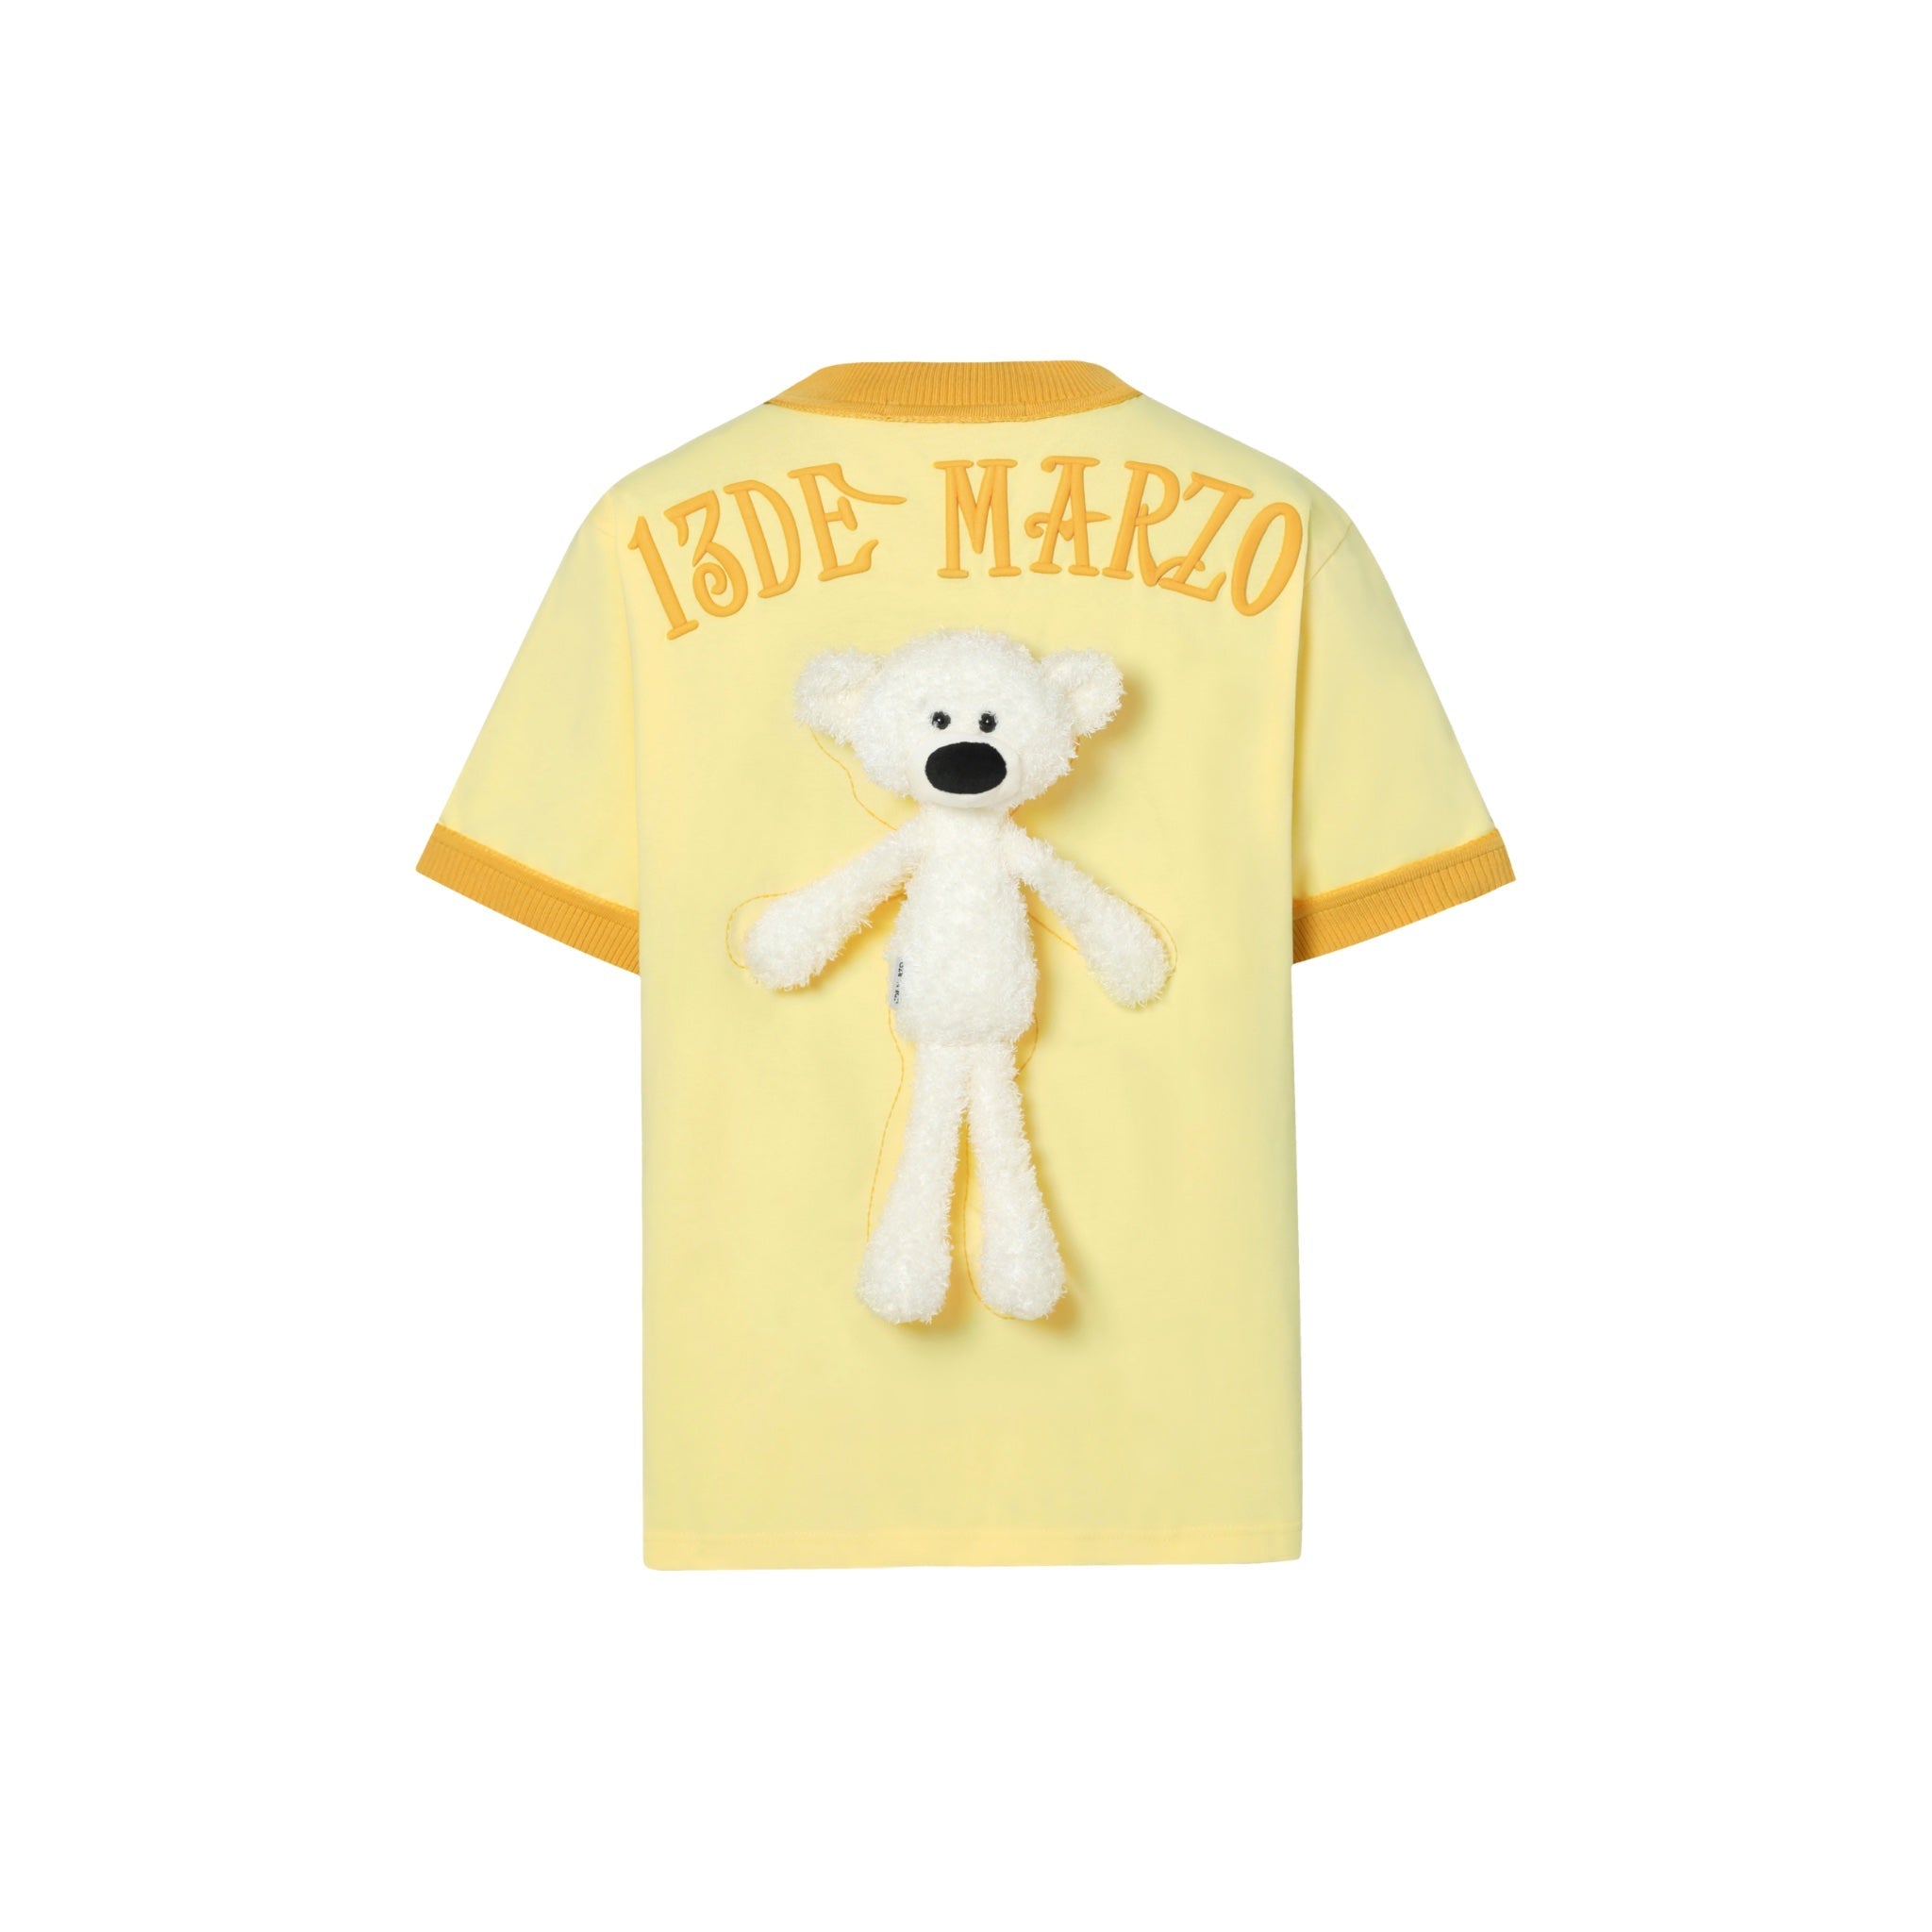 13 DE MARZO Three-dimensional Doll Limited T-shirt Yellow | MADA IN CHINA